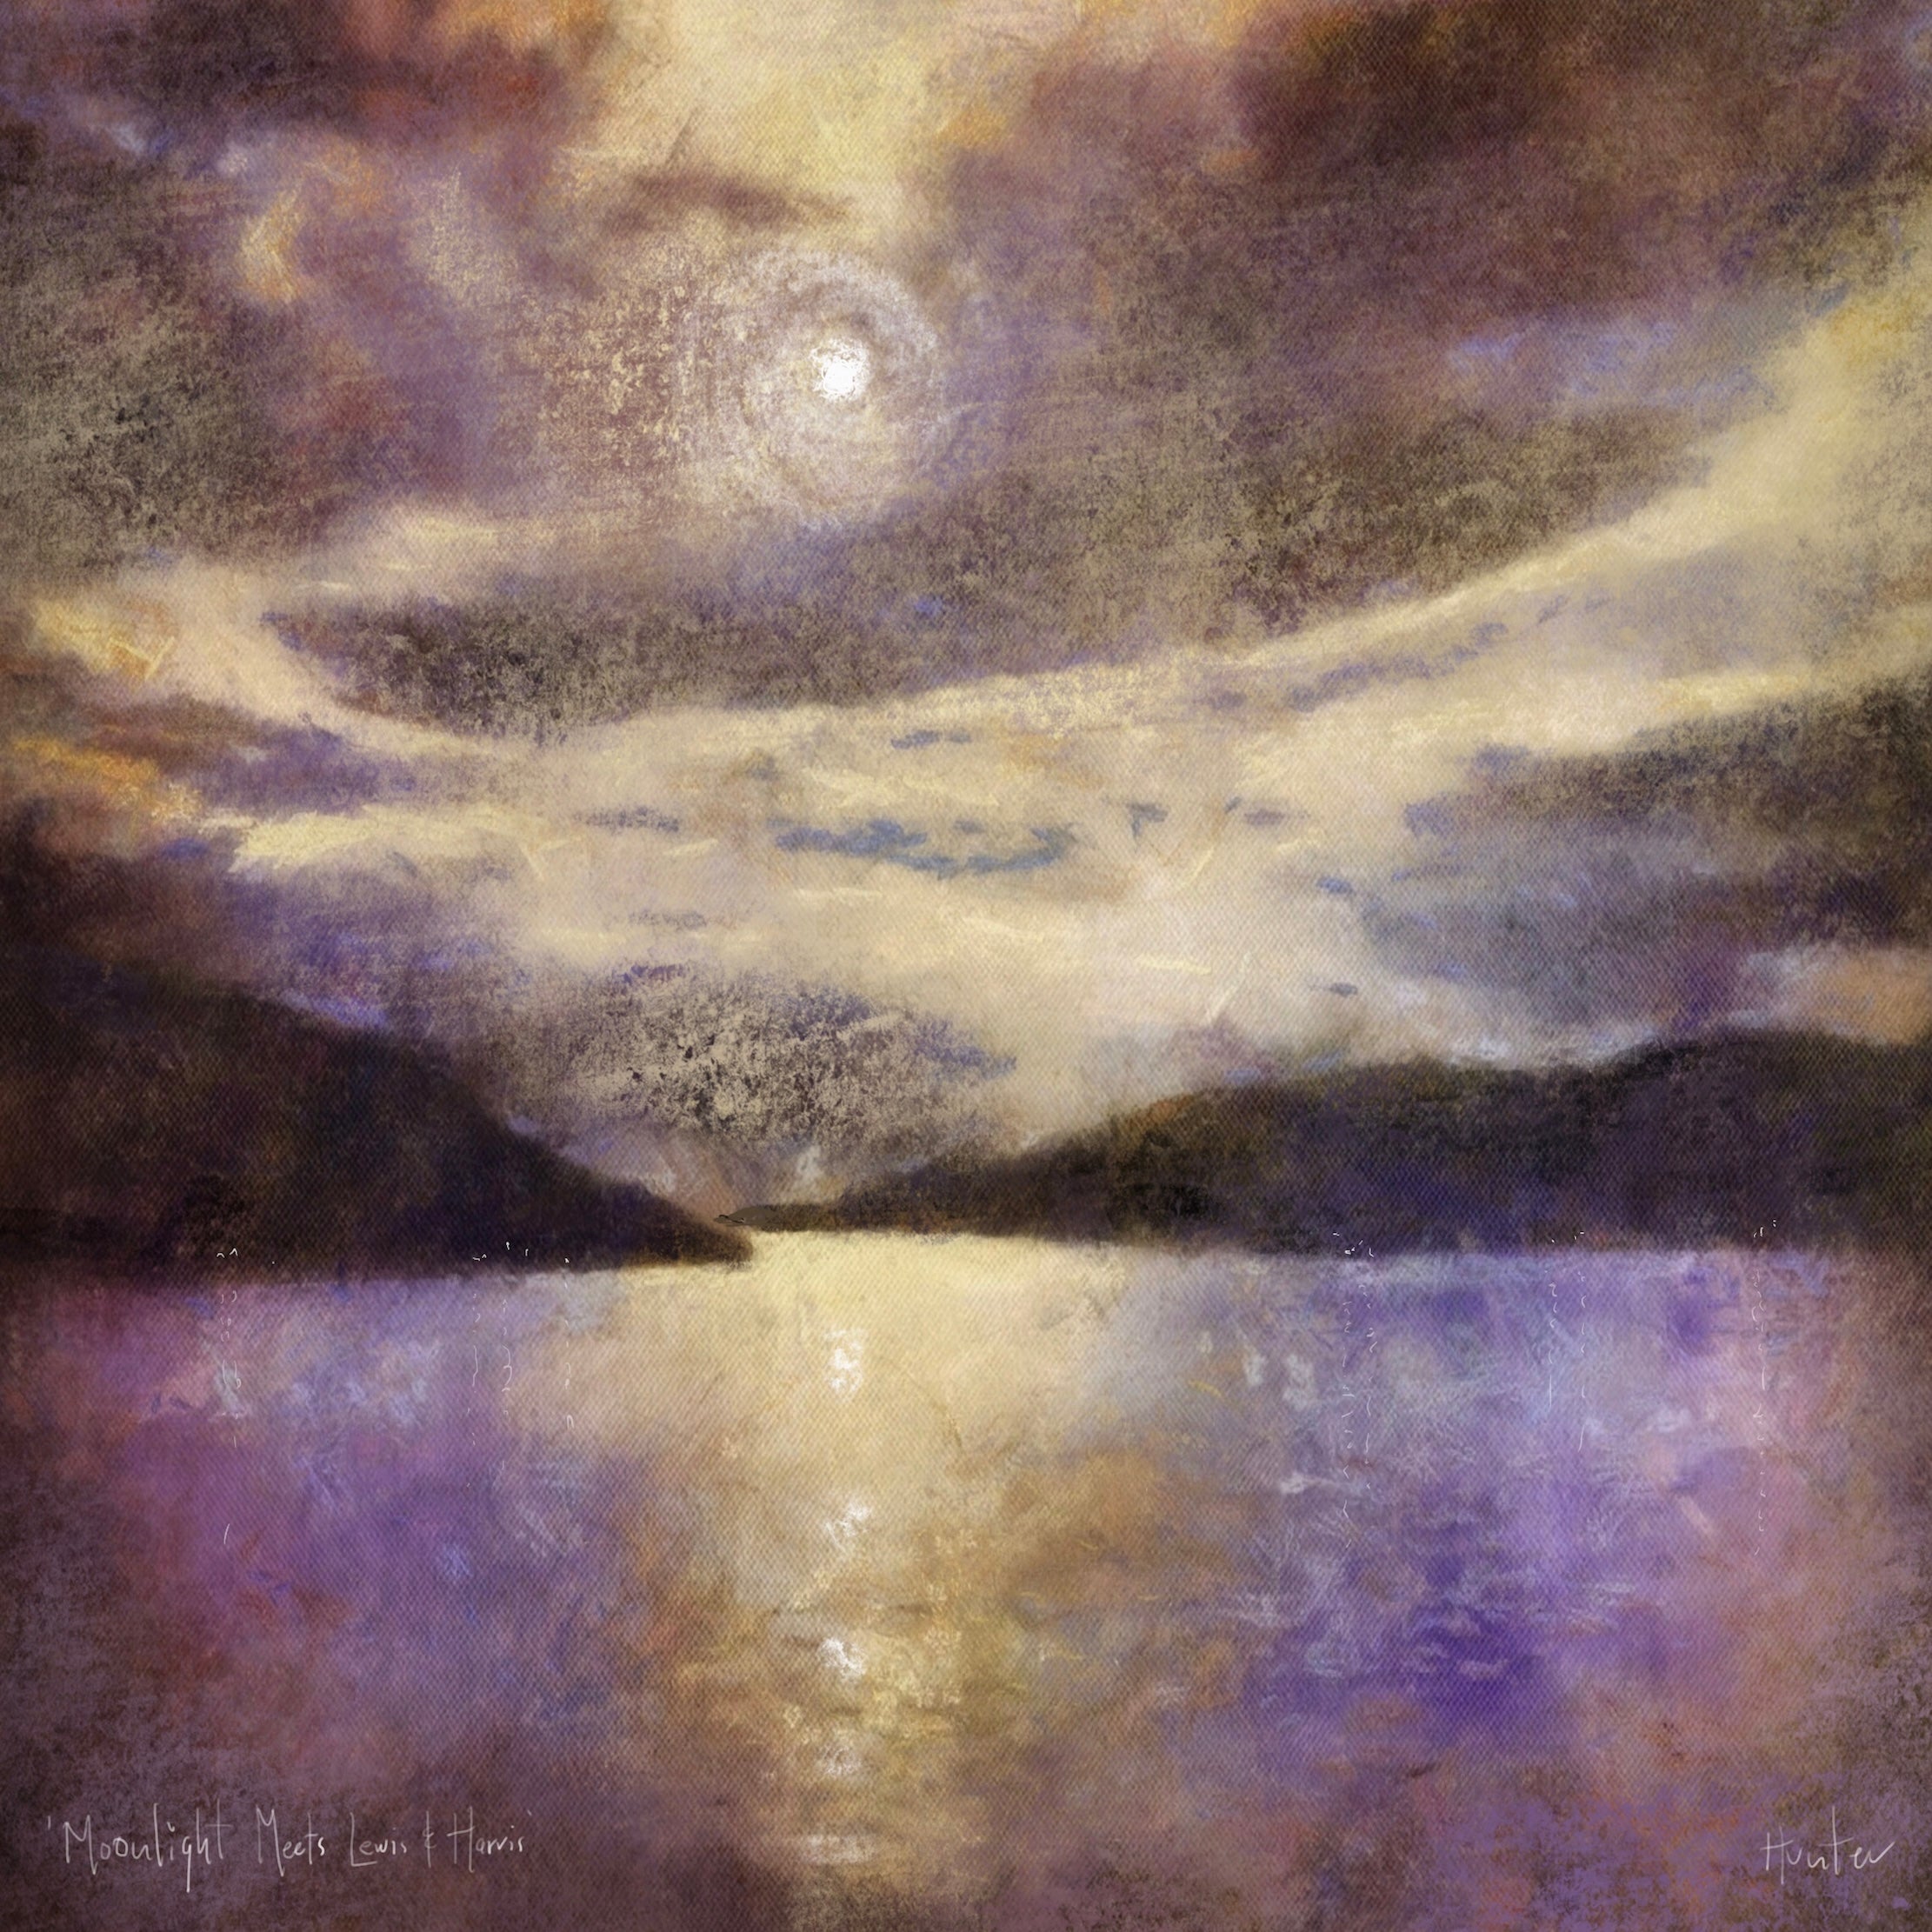 Moonlight Meets Lewis & Harris | Scotland In Your Pocket Art Print-Scotland In Your Pocket Framed Prints-Hebridean Islands Art Gallery-Mounted & Cello Bag: 12.5x12.5 cm-Black Frame-Paintings, Prints, Homeware, Art Gifts From Scotland By Scottish Artist Kevin Hunter